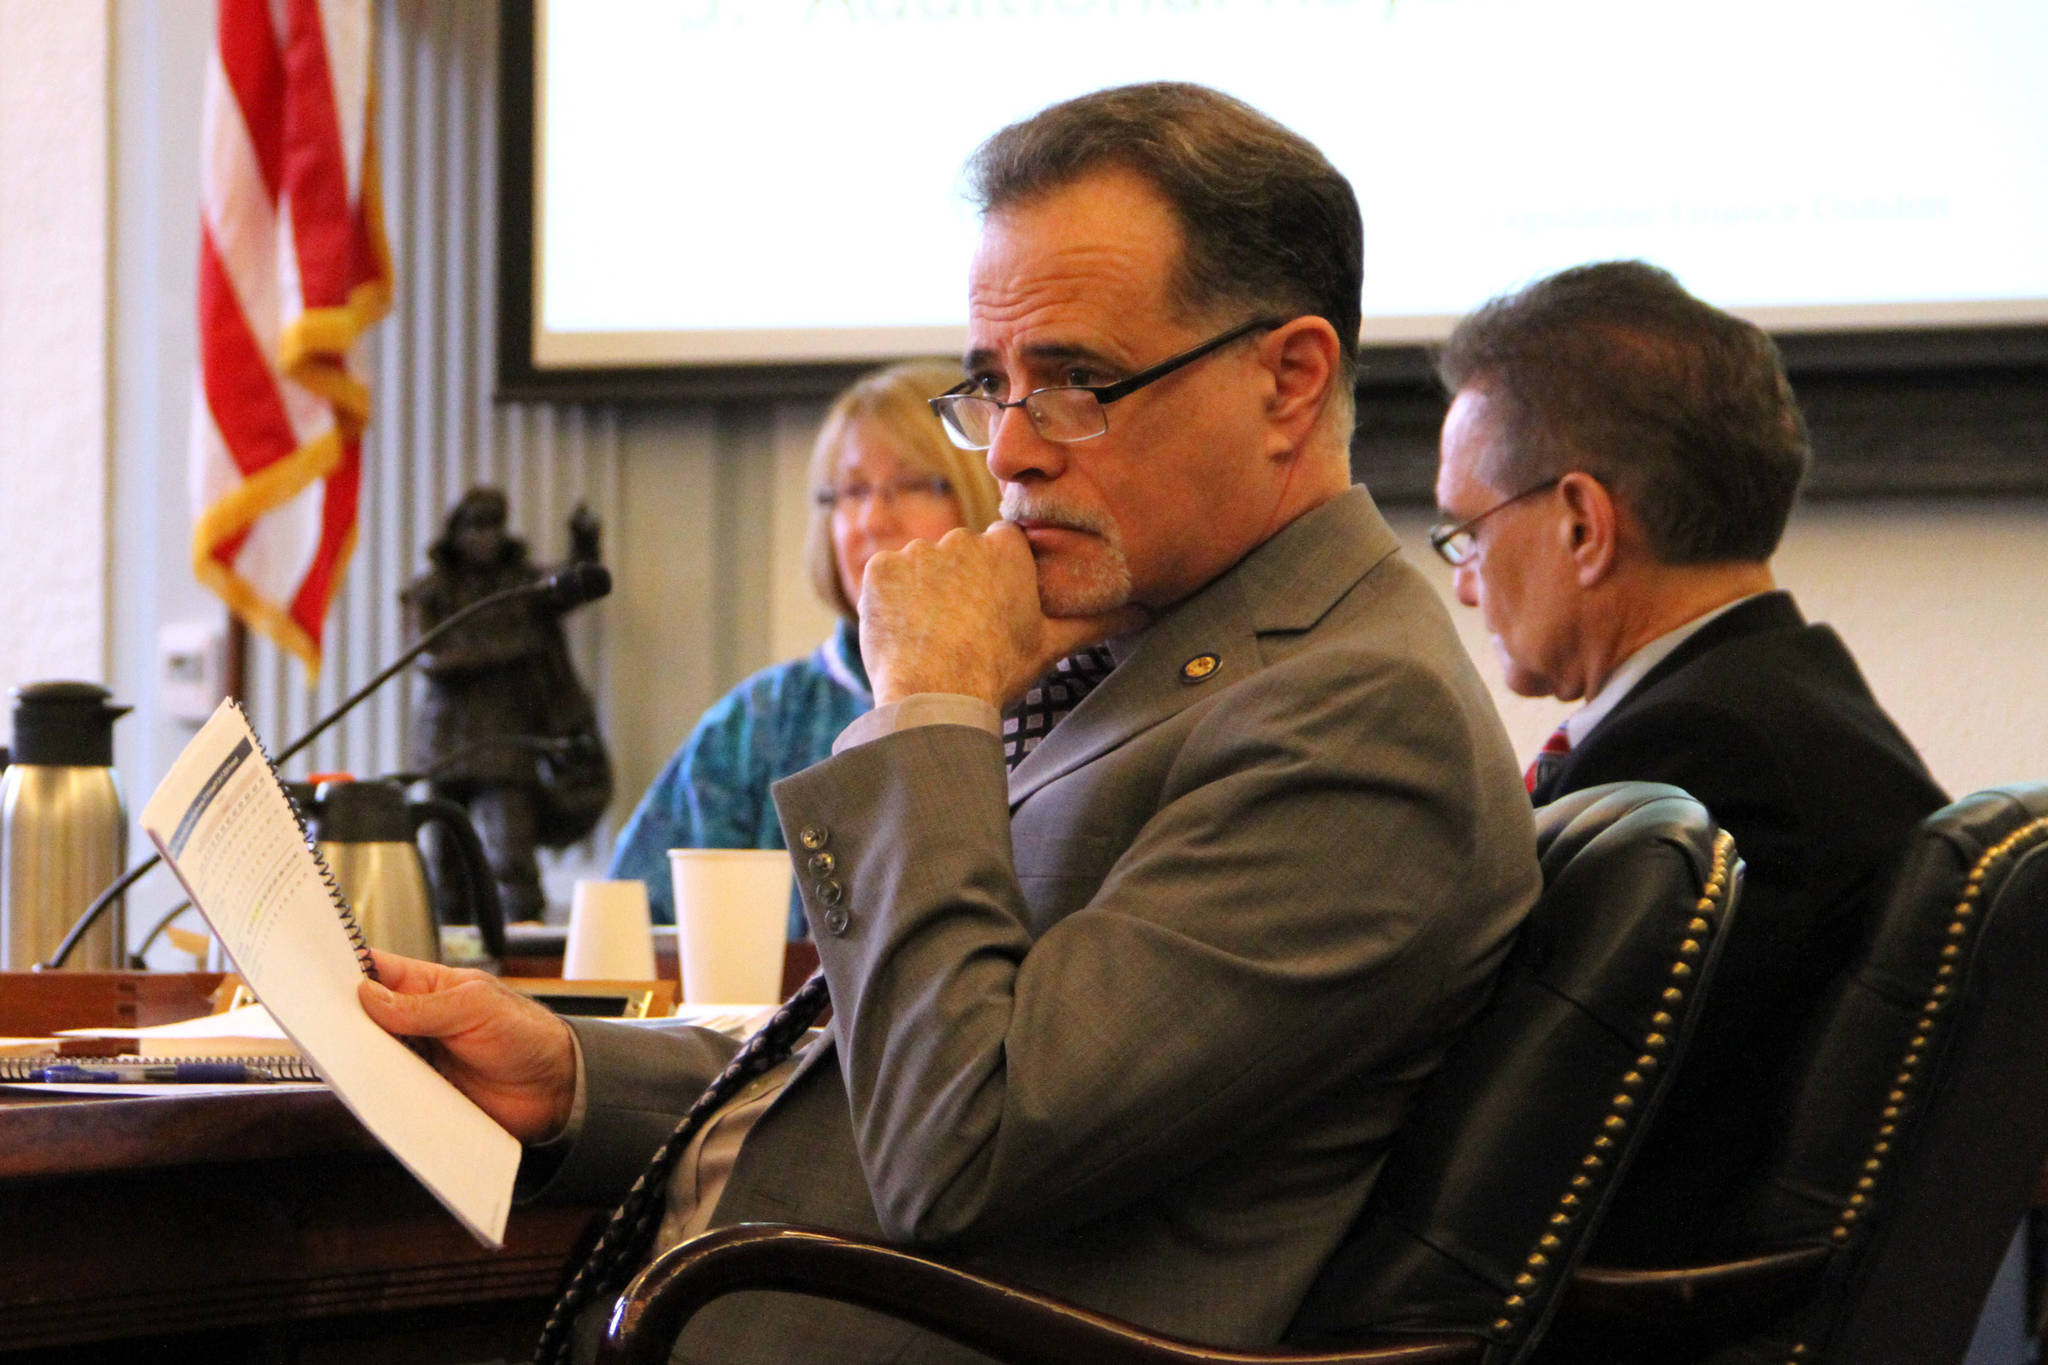 courtesy photo                                State Sen. Peter Micciche (R-Soldotna) listens to testimony in Juneau in this undated photo.